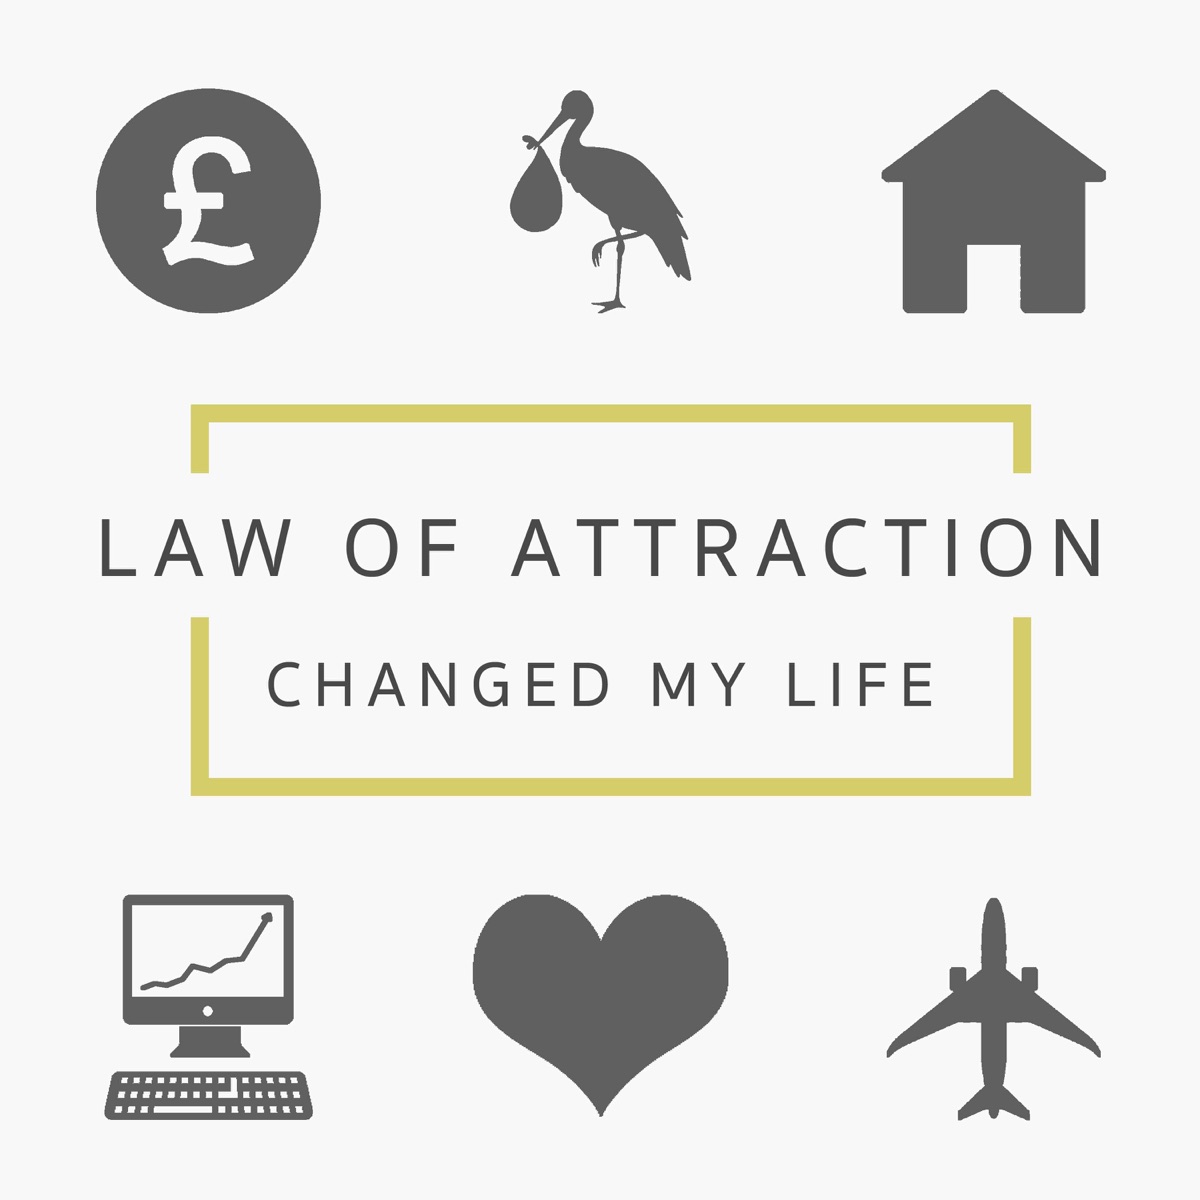 How To Use The Law of Attraction To Find Love